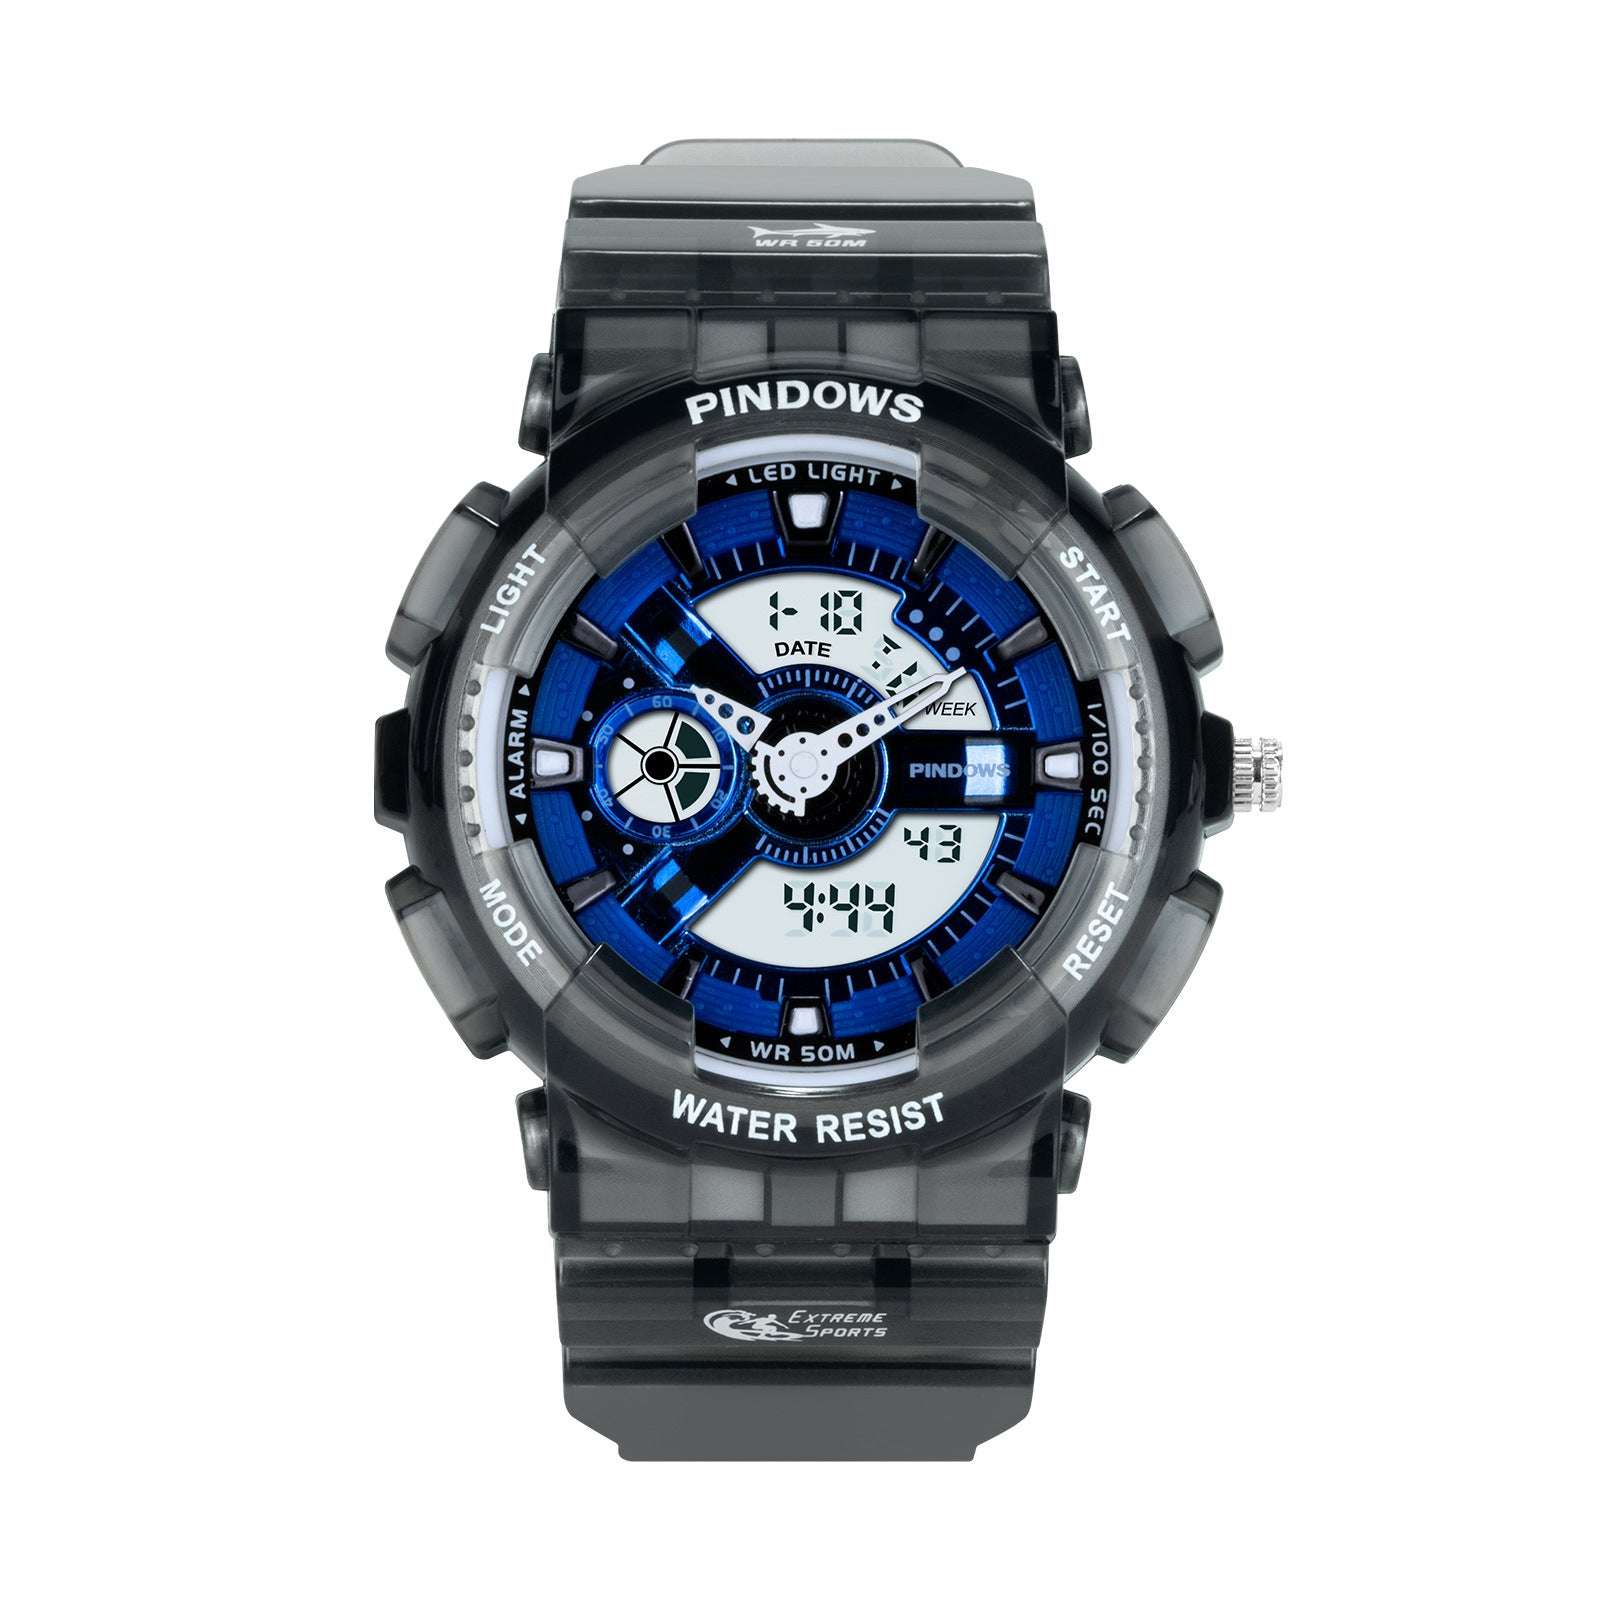 autopostr_pinterest_64088, Boys' Sports Watch, Colorful Boys' Watch, Outdoor Electronic Watch - available at Sparq Mart